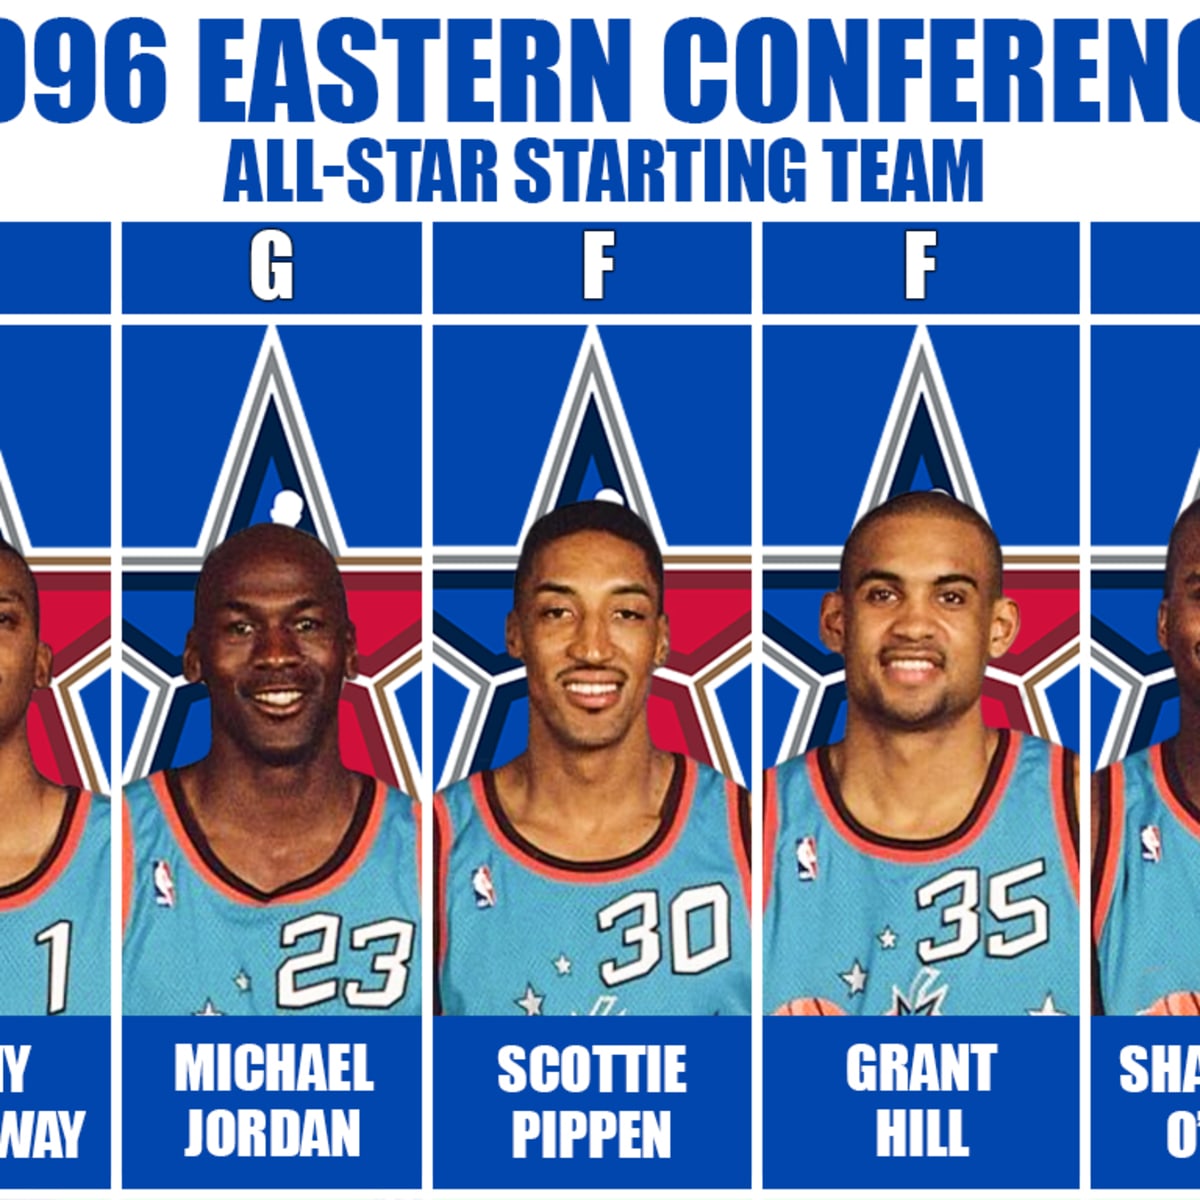 Michael Jordan of the Eastern Conference All-Stars puts a shot up